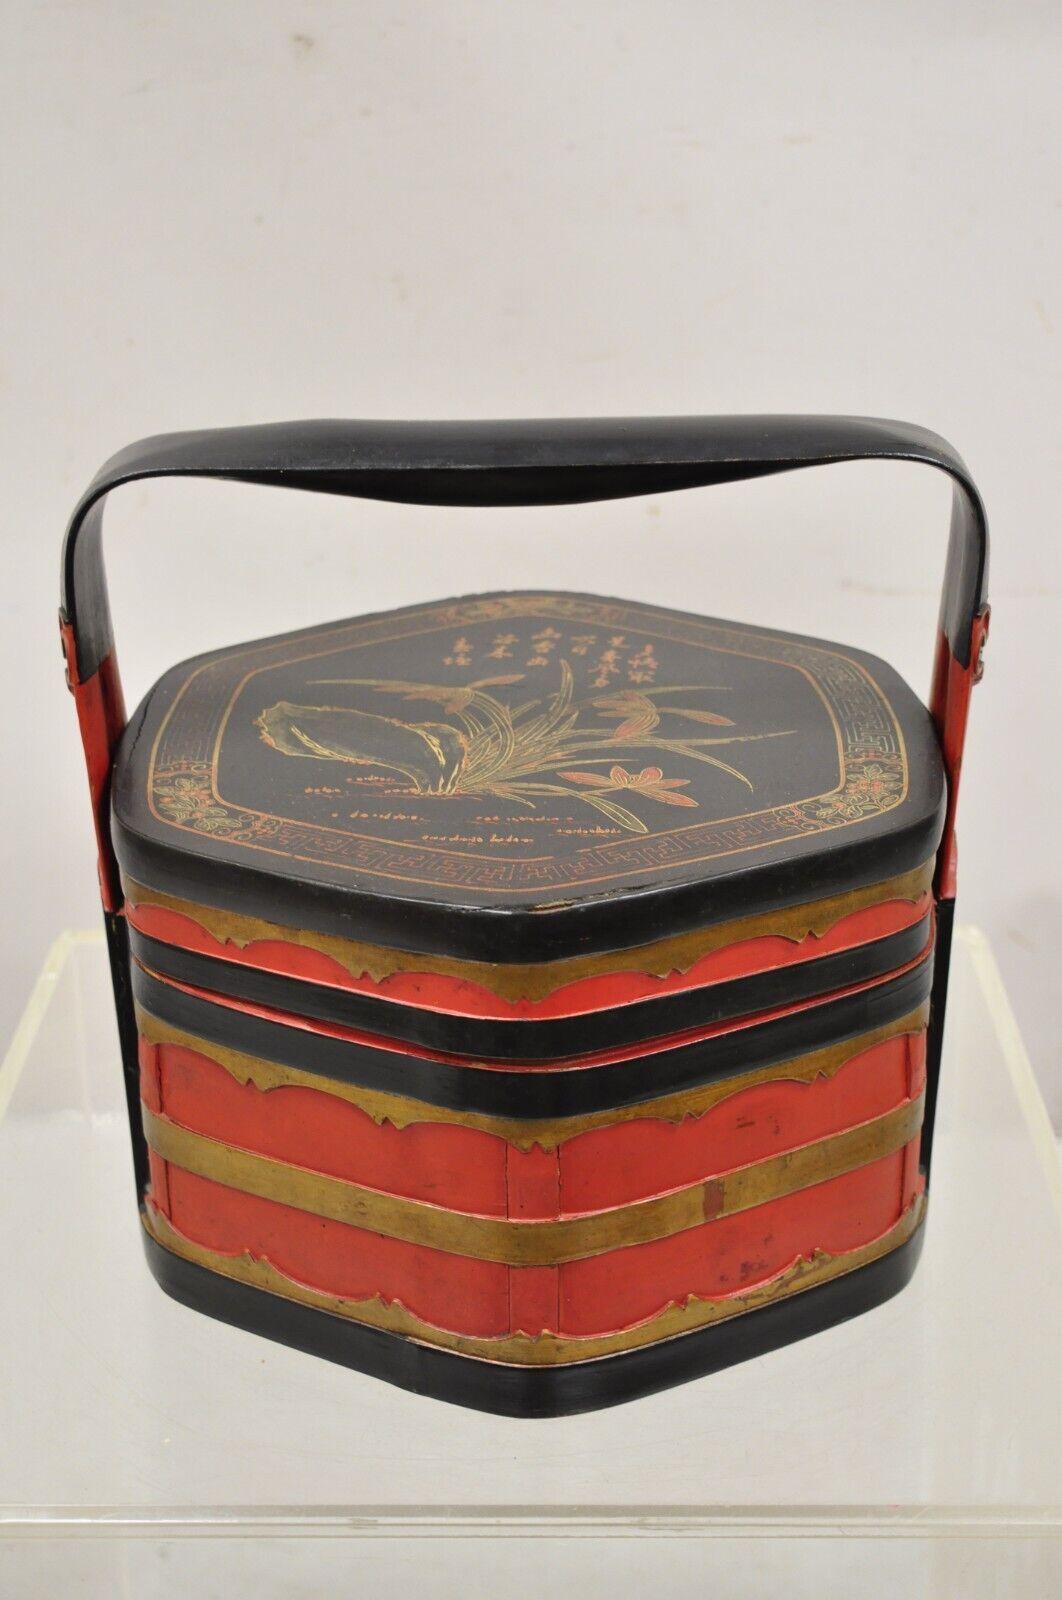 Vintage Chinese Black and Red Lacquer Floral Painted Lidded Wooden Basket Box. Circa Early to Mid 20th Century. Dimensions : 11